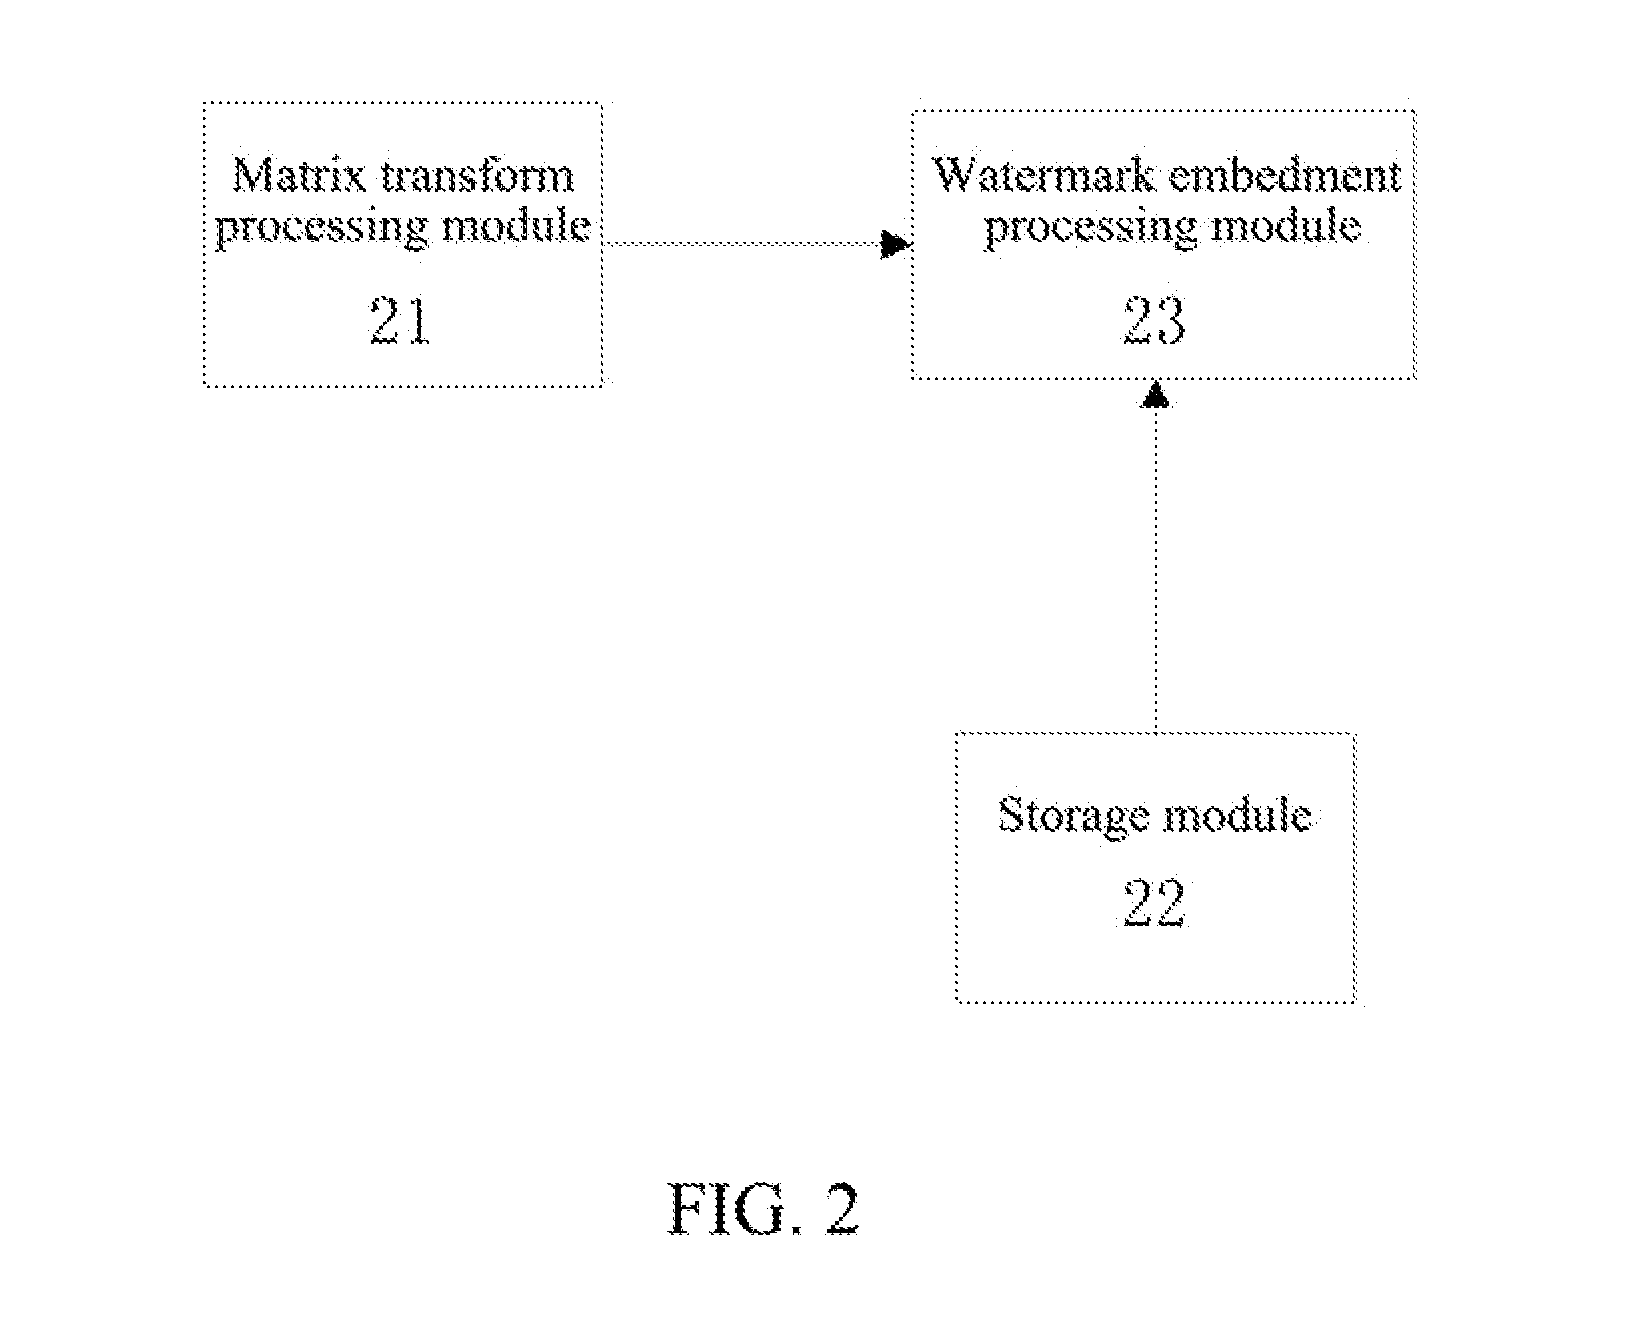 Method and System for Embedding and Extracting Image Digital Watermark